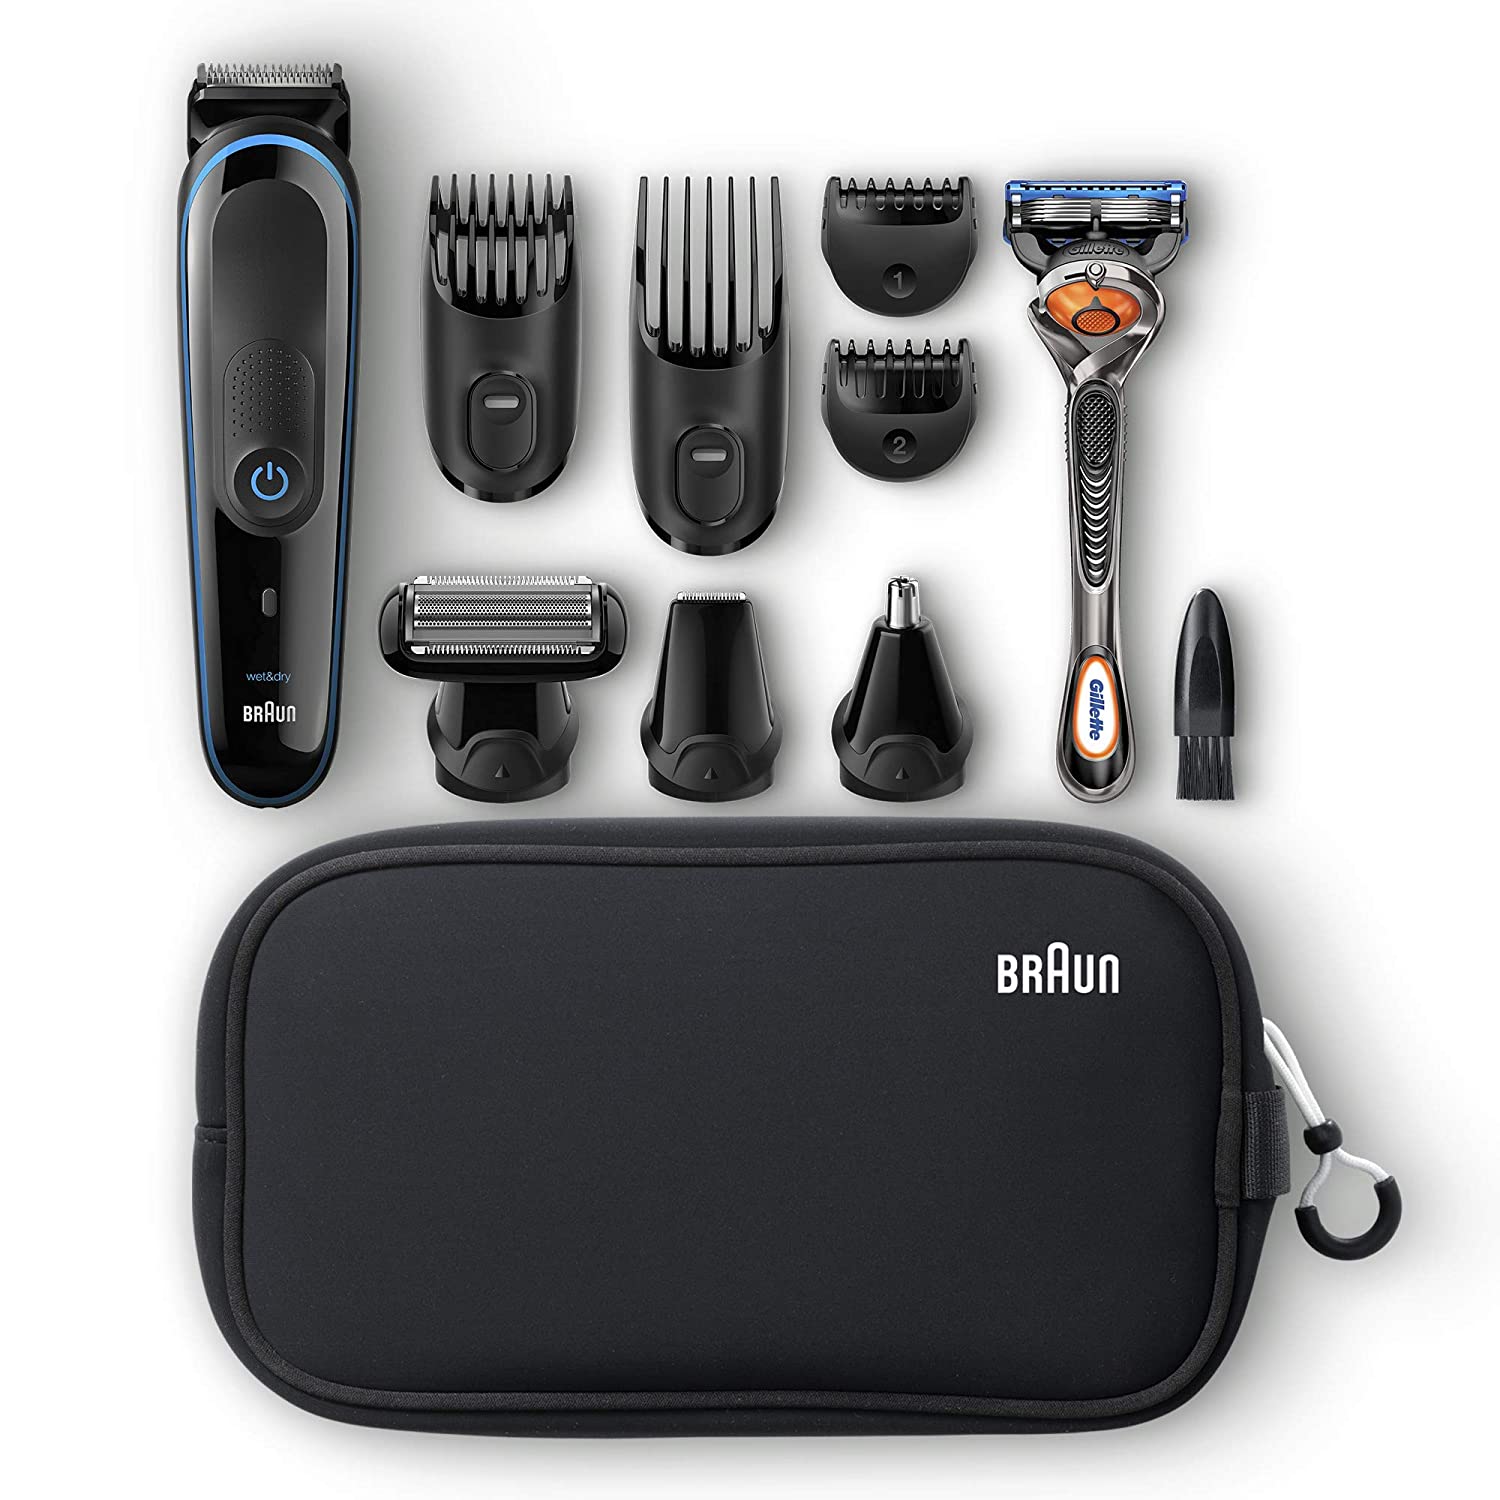 Braun Hair Clippers for Men MGK3980, 9-in-1 Beard Trimmer, Ear and Nose Trimmer, Body Groomer, Detai